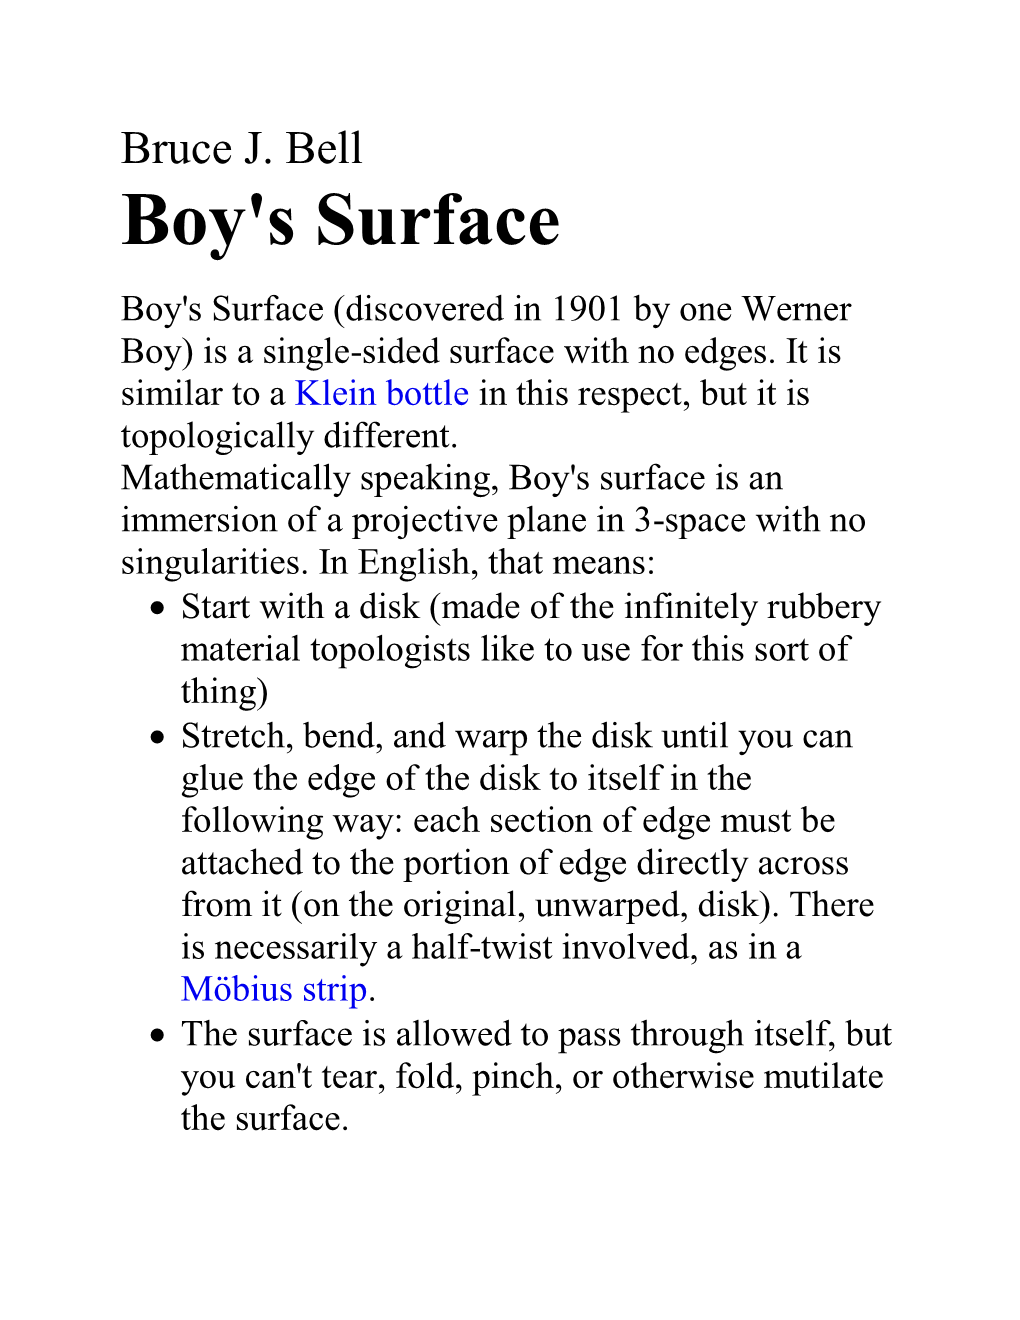 Boy's Surface Boy's Surface (Discovered in 1901 by One Werner Boy) Is a Single-Sided Surface with No Edges